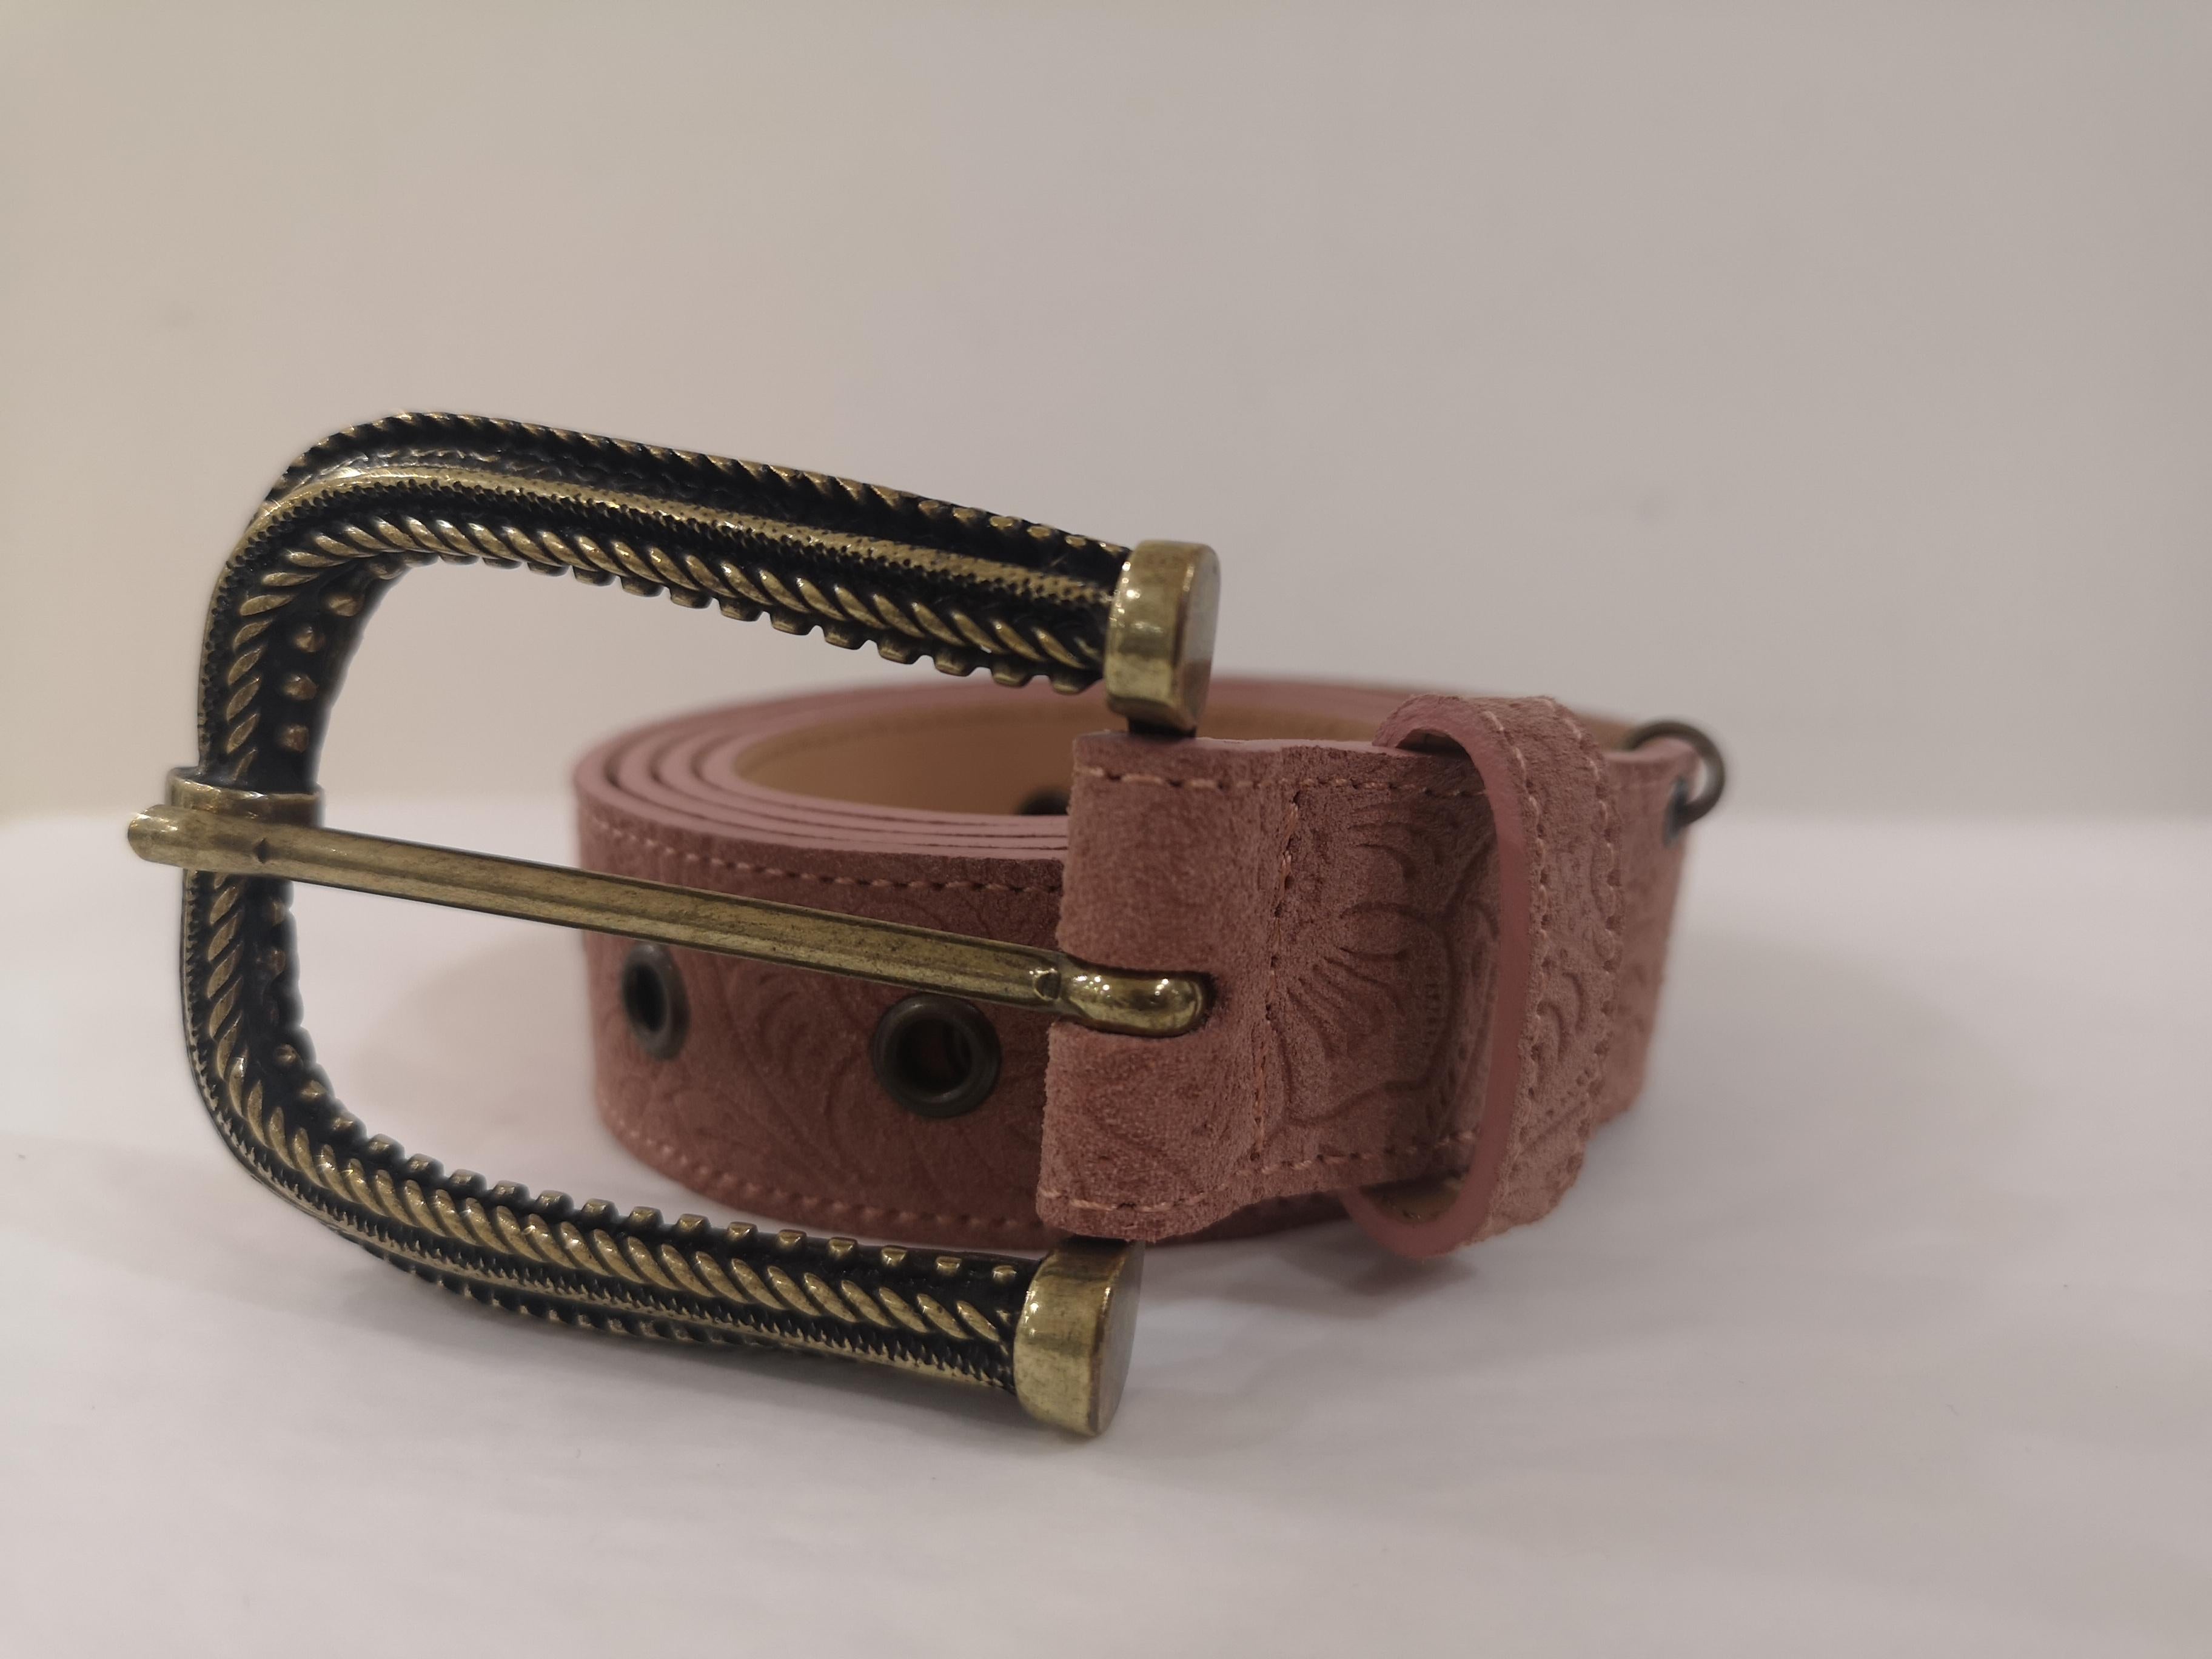 Pink leather suede belt NWOT
totally made in italy
one size
total lenght 105 cm
heigh 3 cm